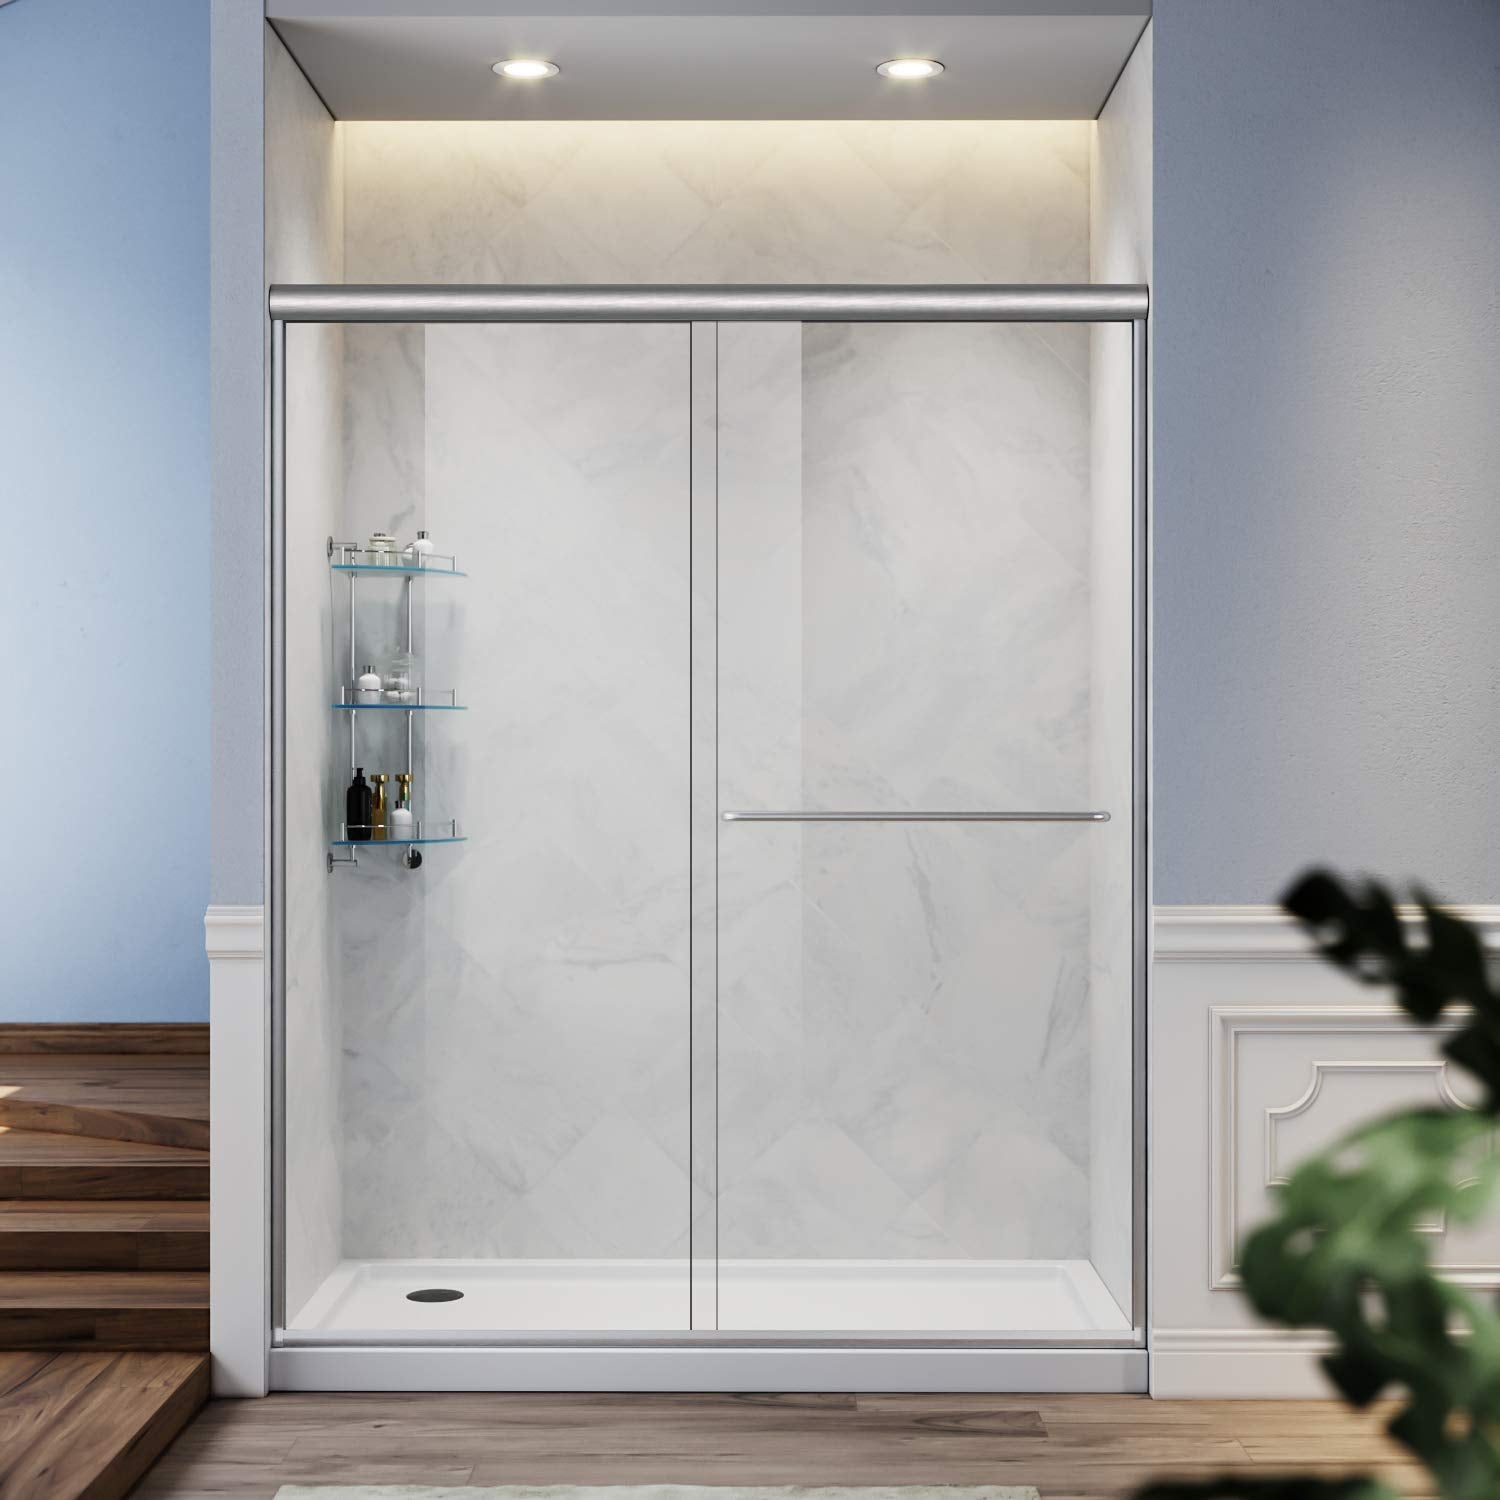 Sunny Shower Sliding Corner Glass Round Shower Enclosure, Quadrant Shower Cubicle Clear Glass Shower Door No Base, 36 7/10 in.W x 36 7/10 in.D x 71 4/